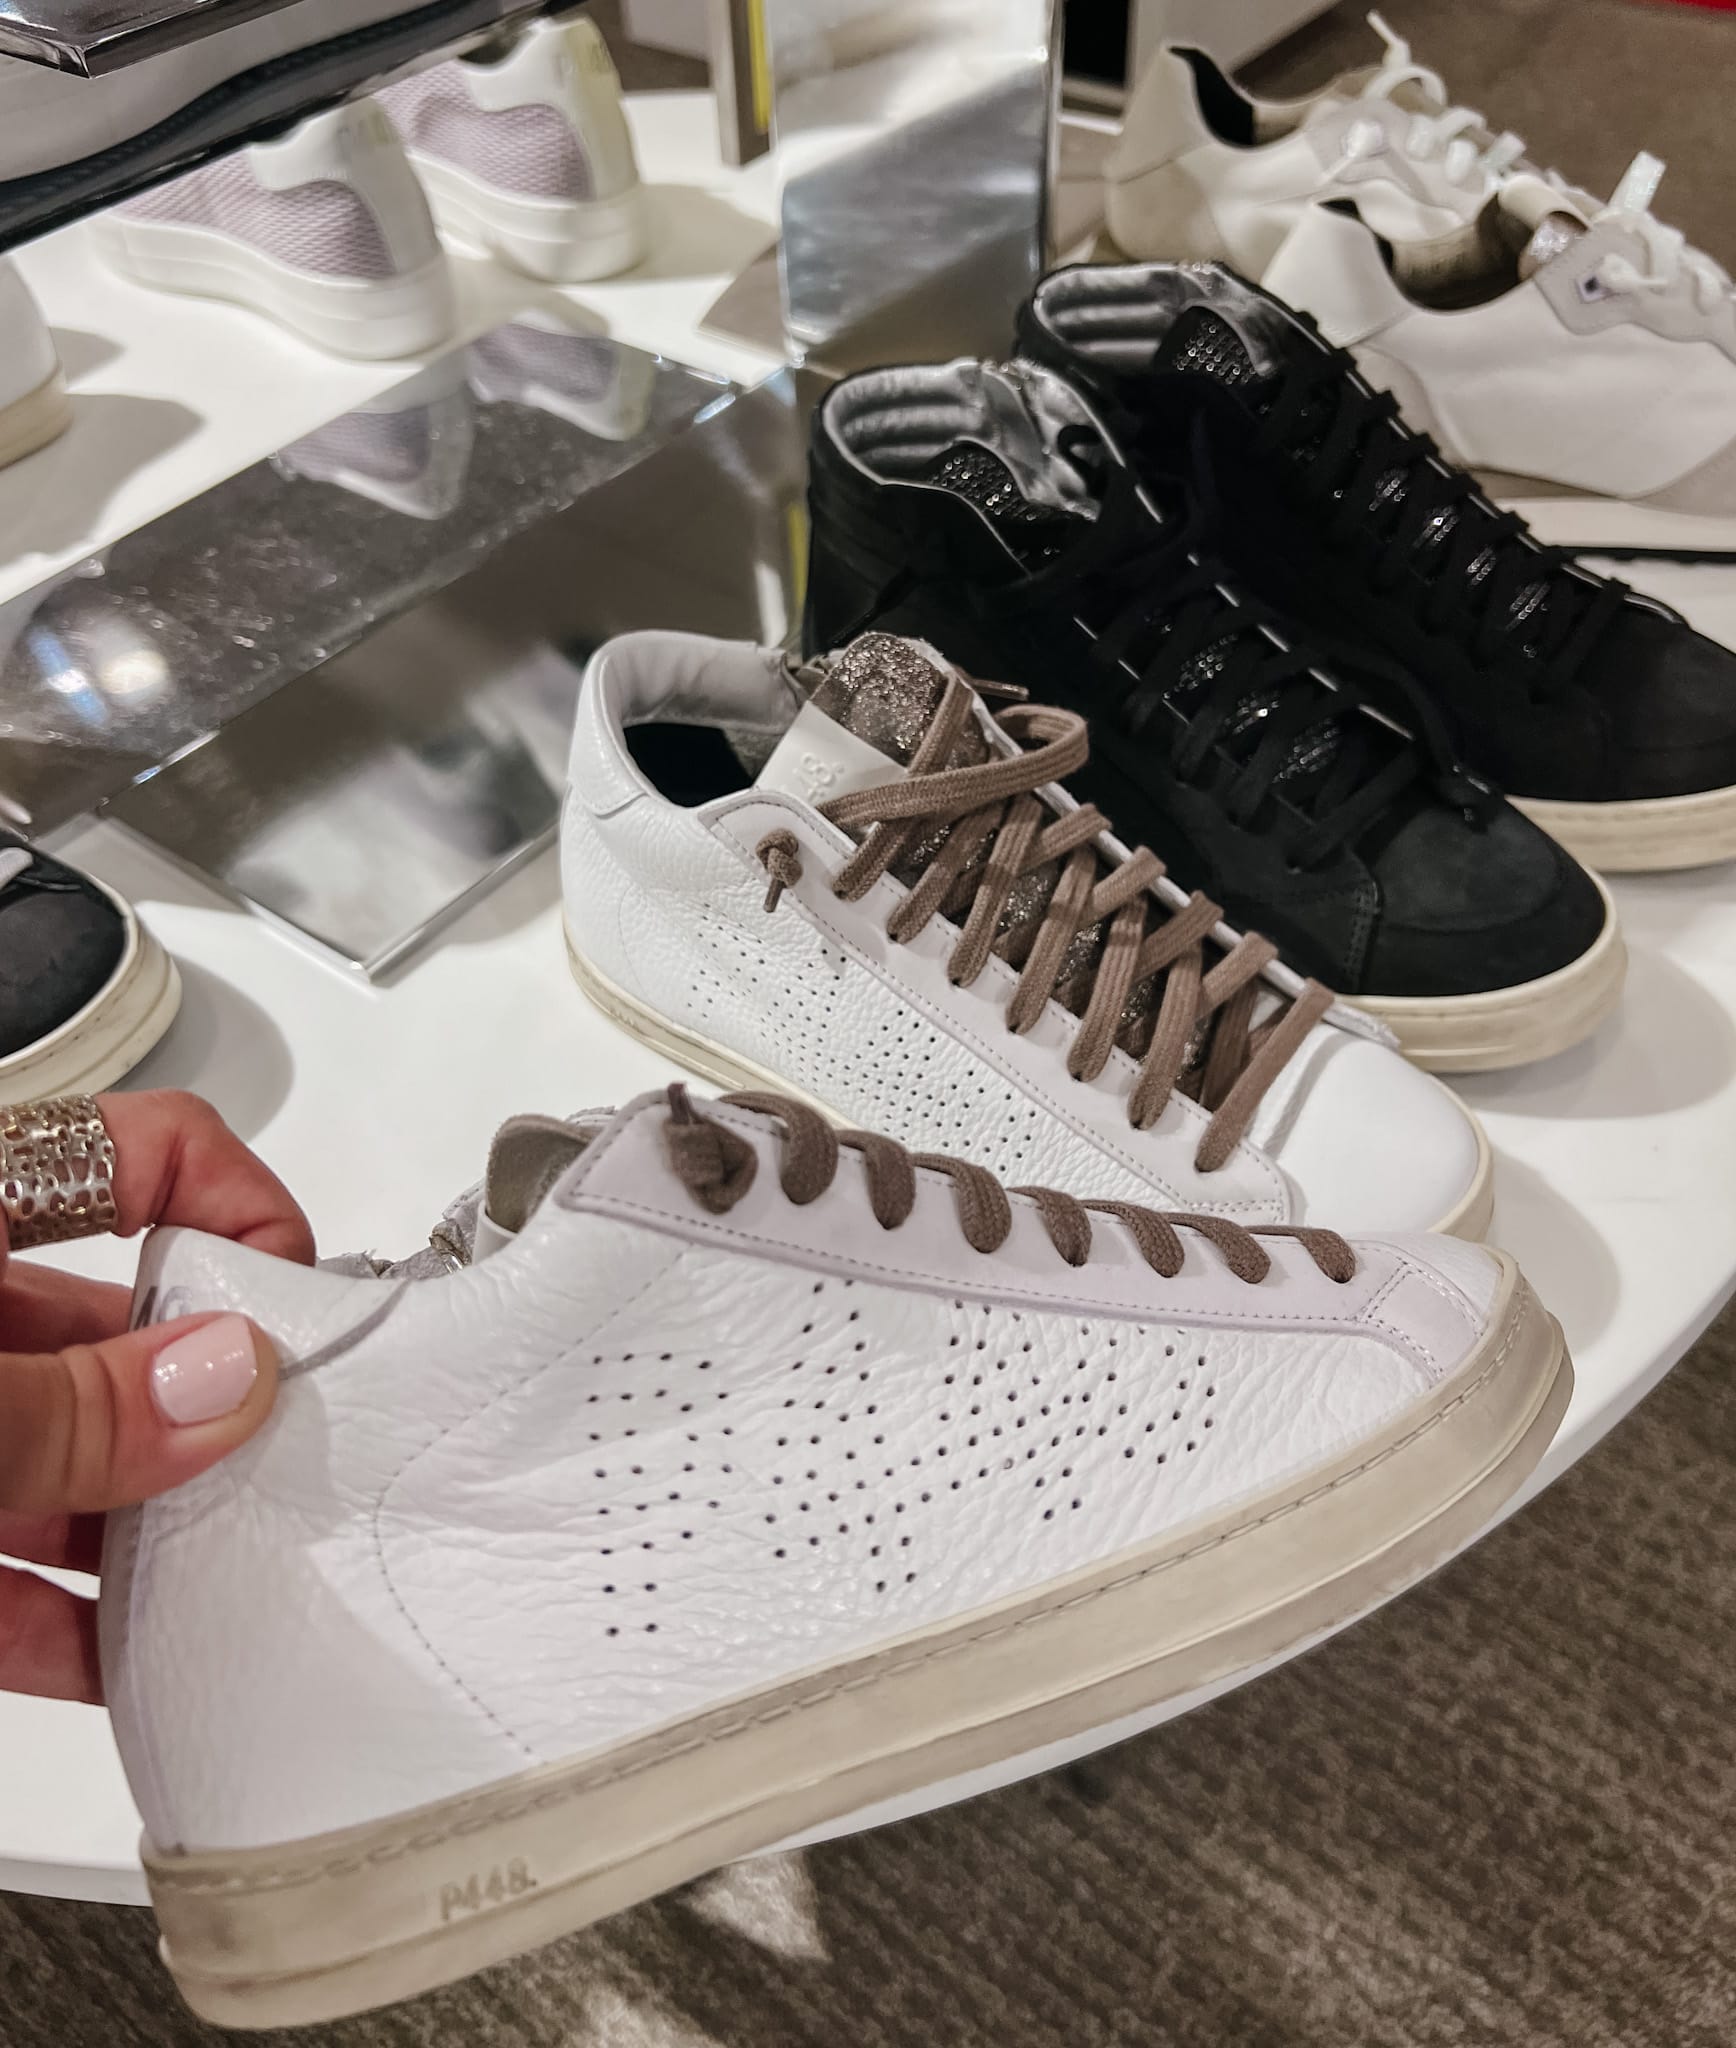 Nordstrom Anniversary Sale, P448 sneakers, glitter sneakers, white sneakers, fall outfit